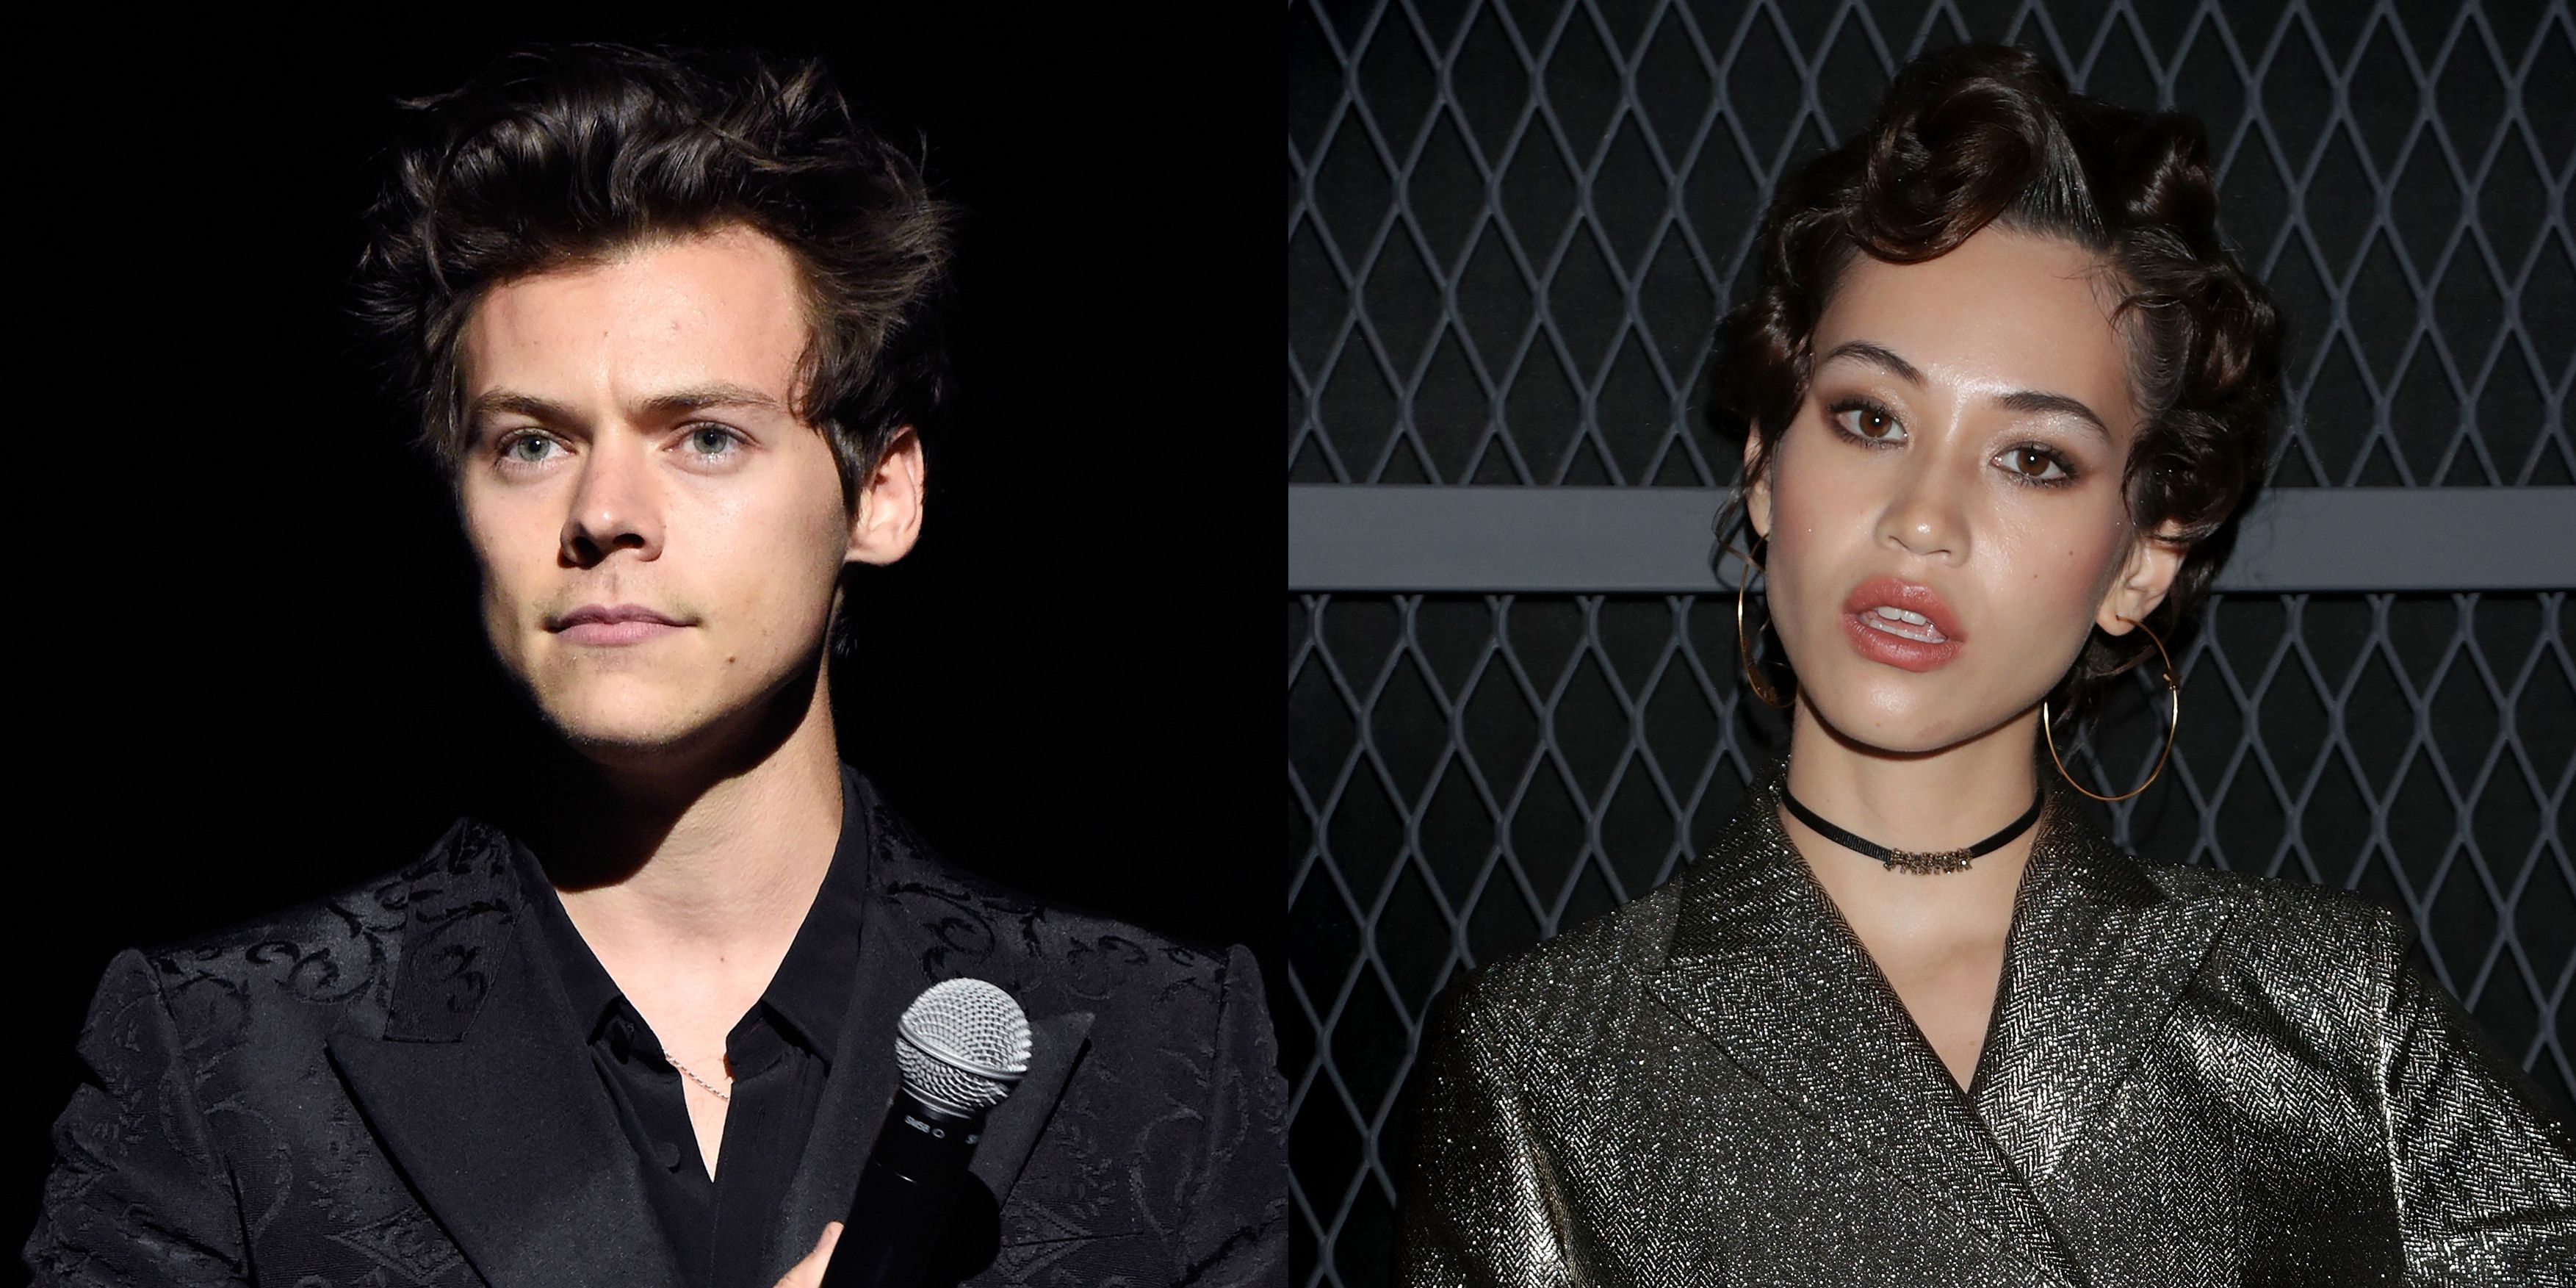 Who Is Kiko Mizuhara? - Facts About Harry Style's Rumored Girlfriend